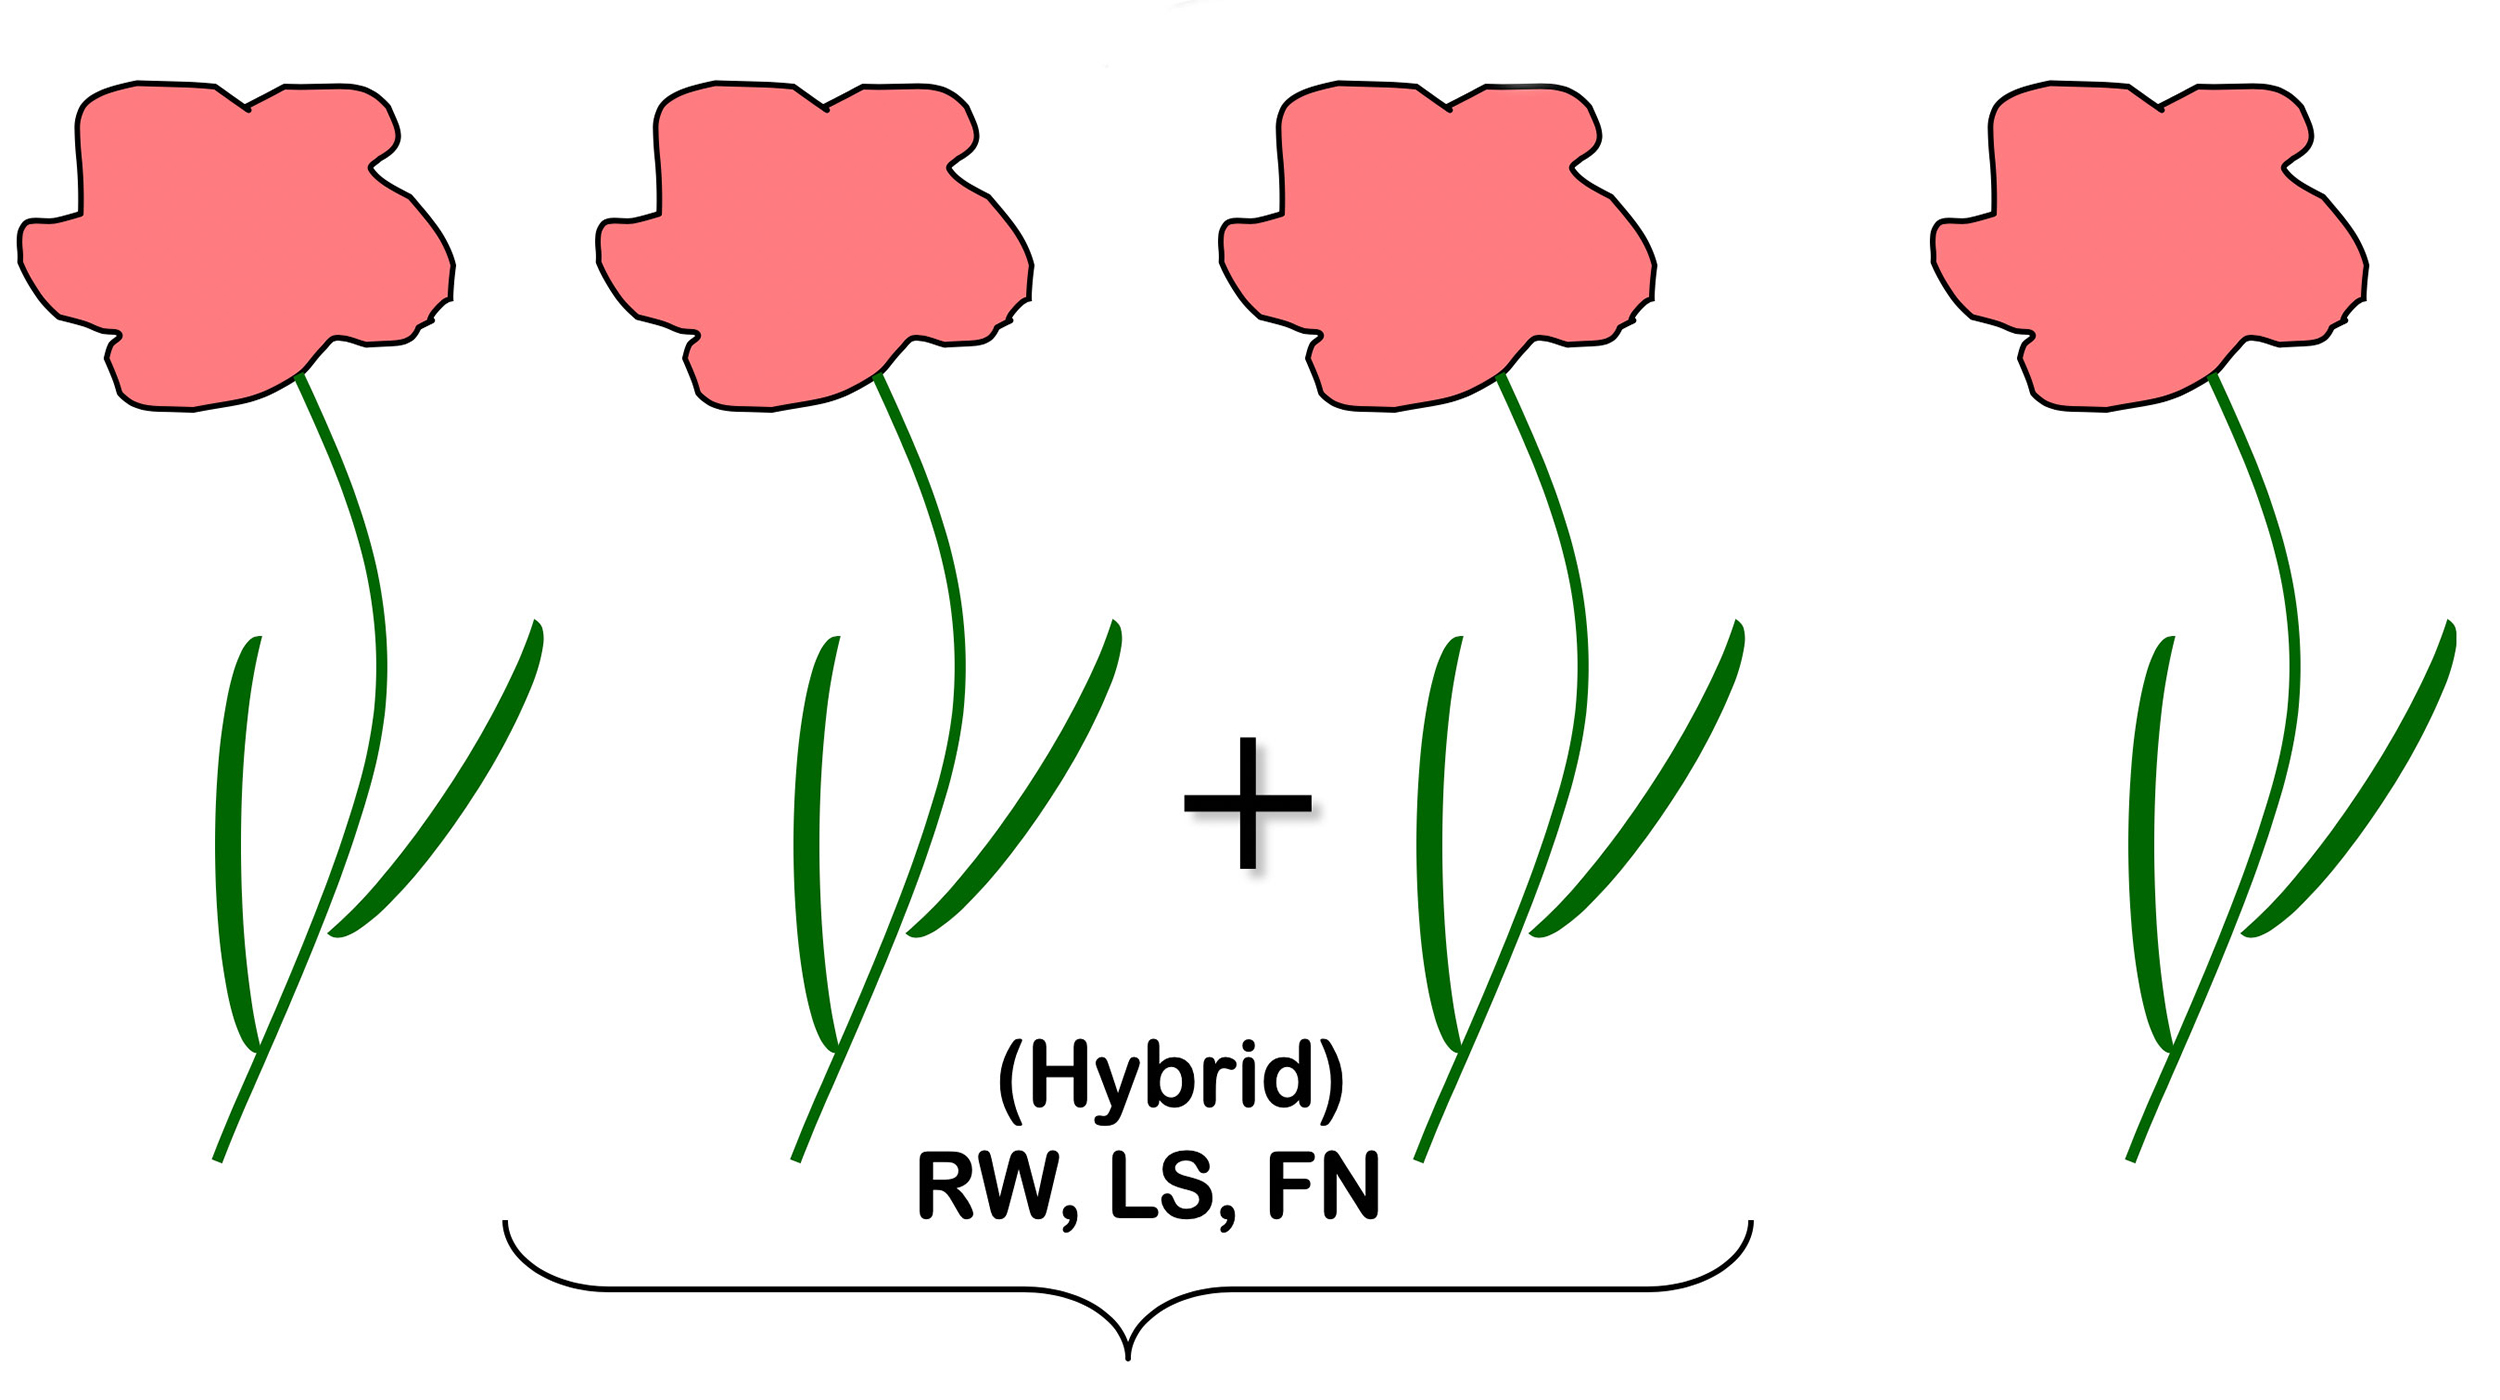 A diagram of four hybrid plants produced from the two parent plants. The plants have pink flowers, long stems, and narrow leaves. (Traits are labeled: RW, LS, FN).